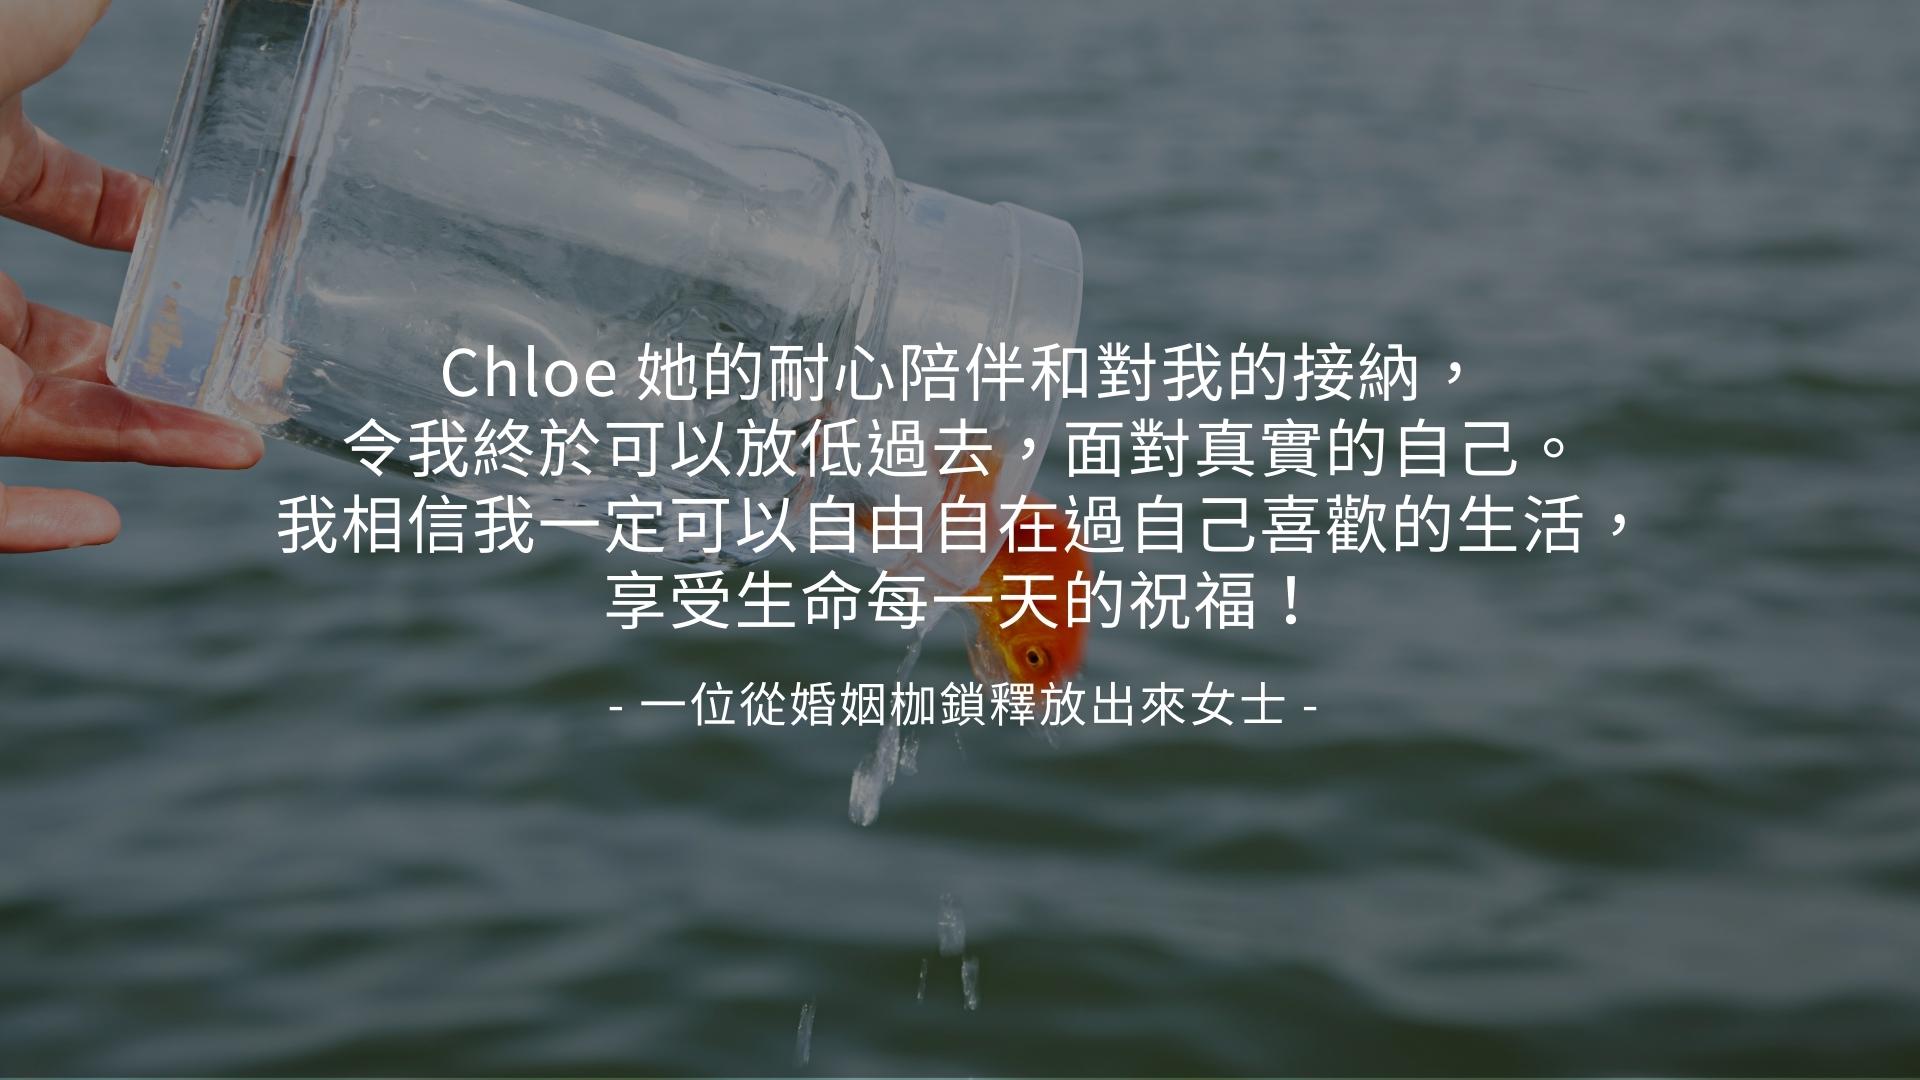 A person is holding a bottle of water with Chinese written on it, showing signs of 焦慮 (anxiety).